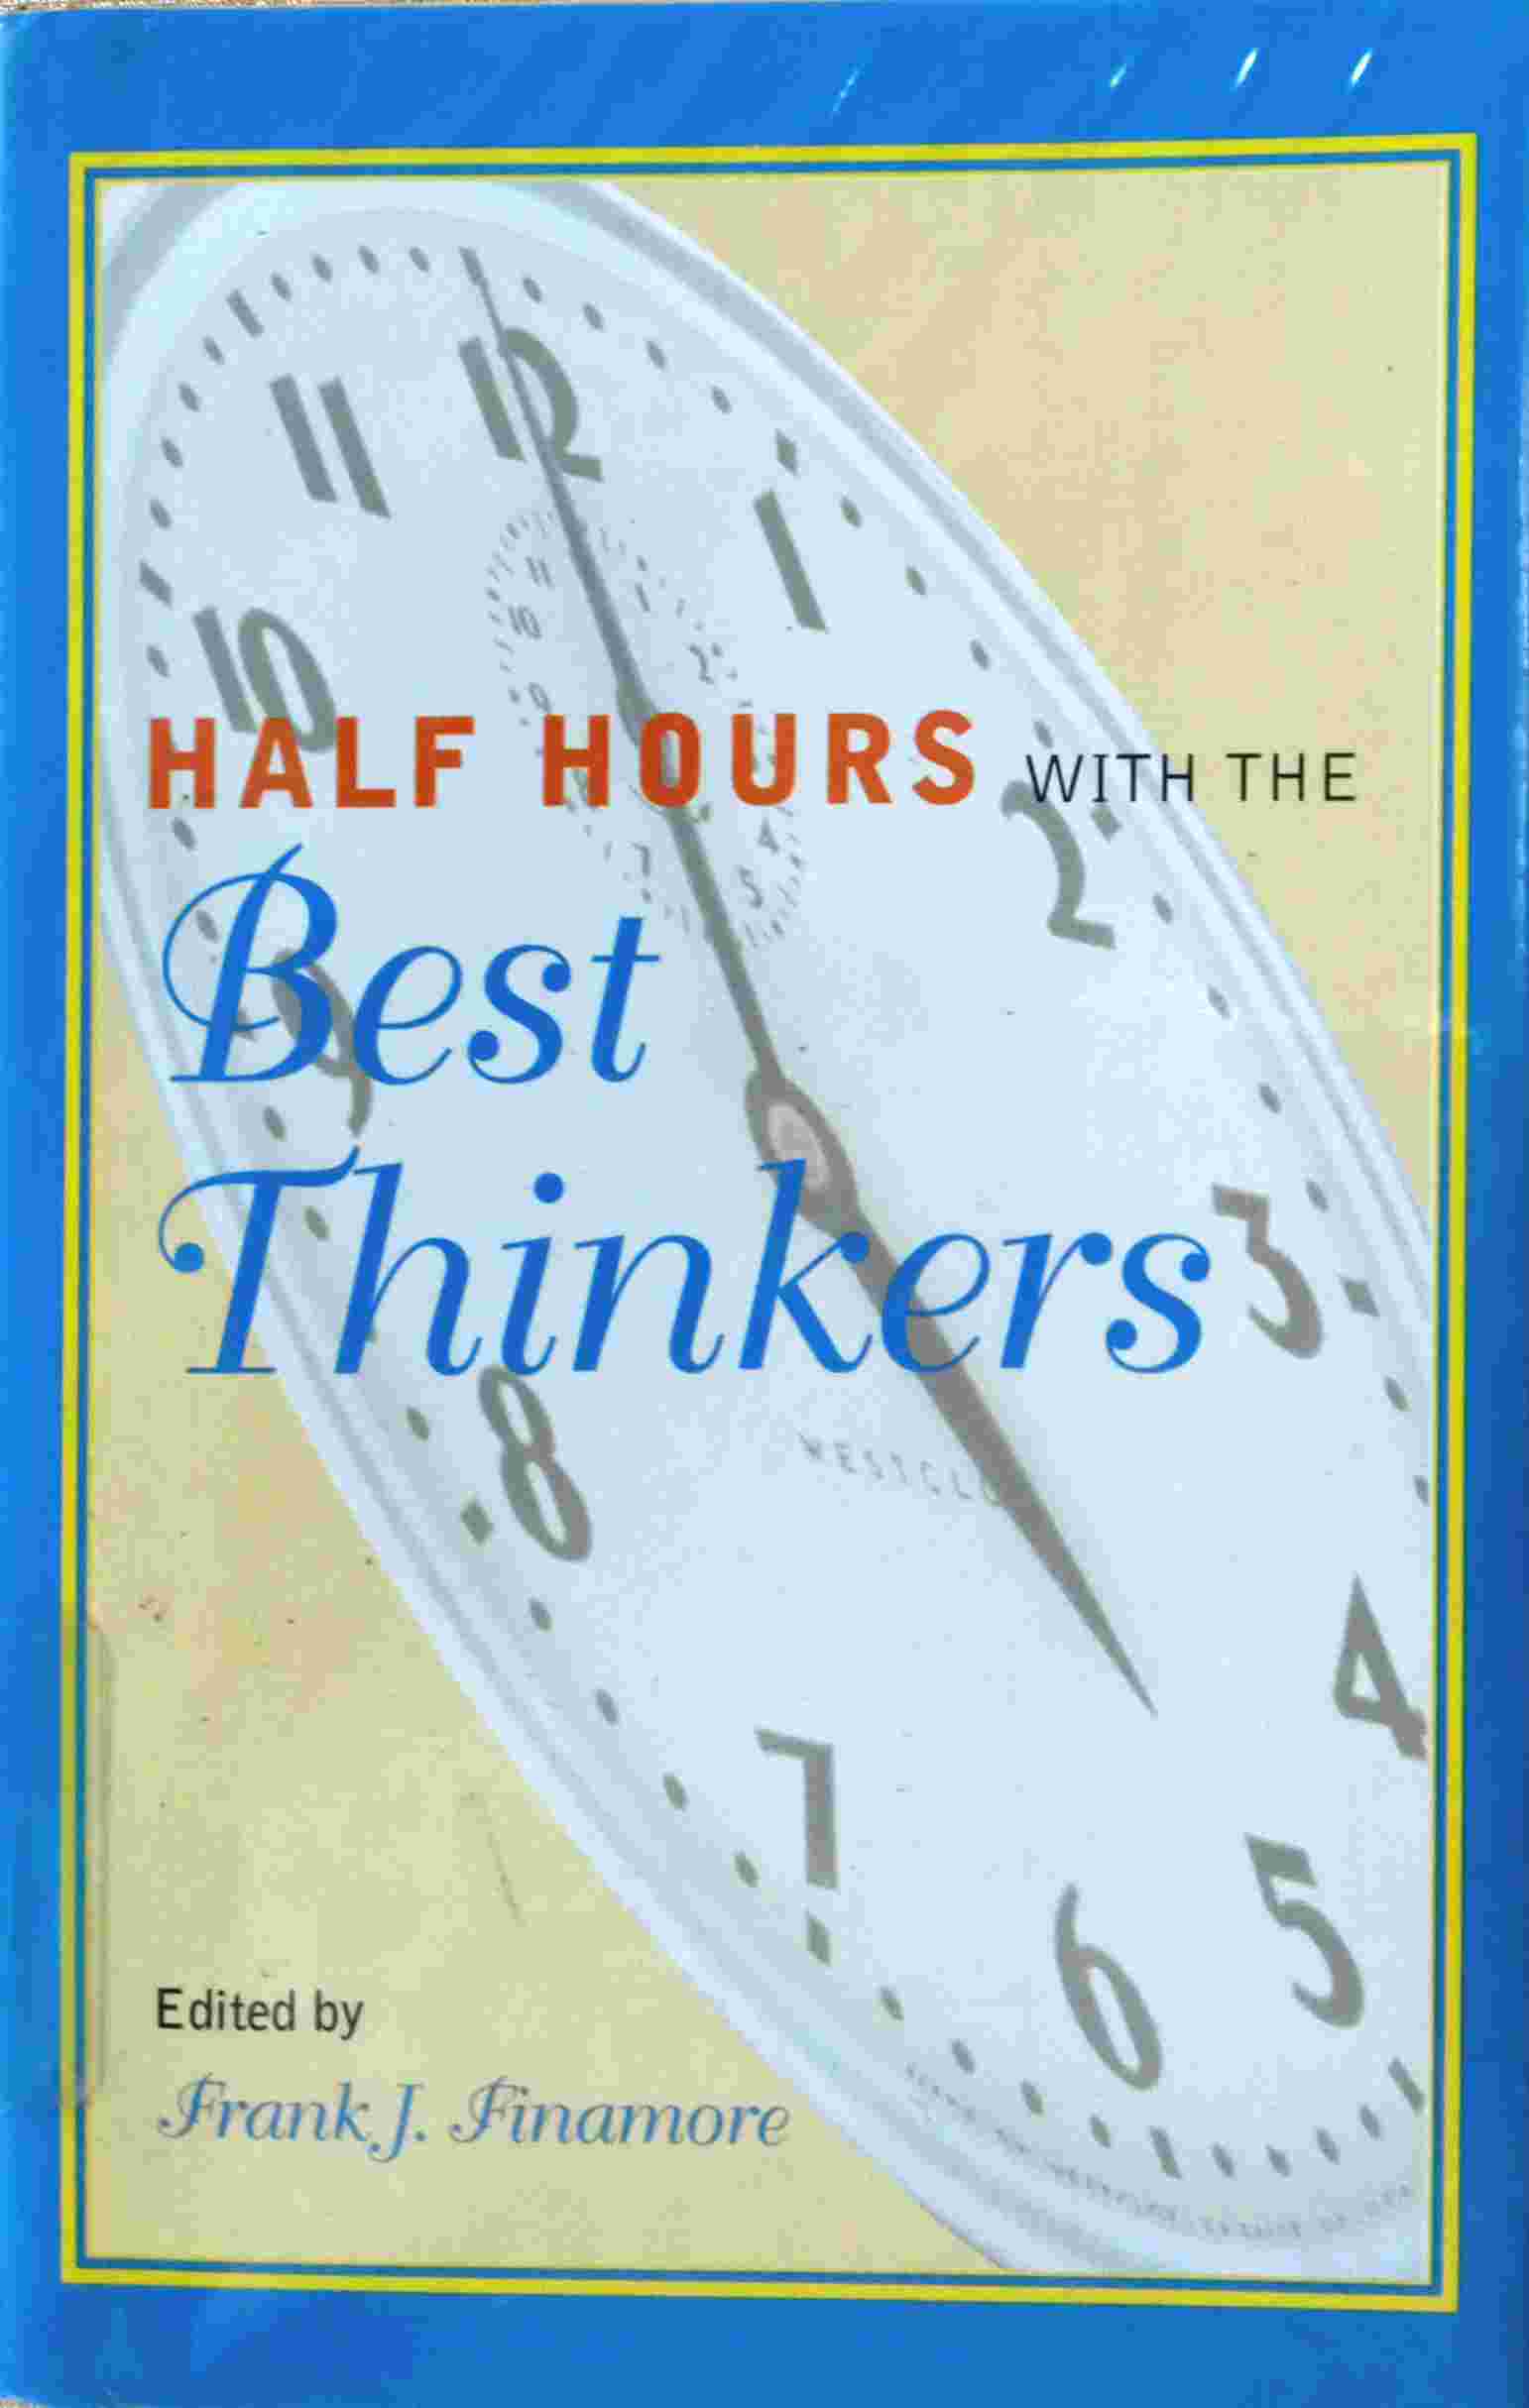 HALF HOURS WITH THE BEST THINKERS